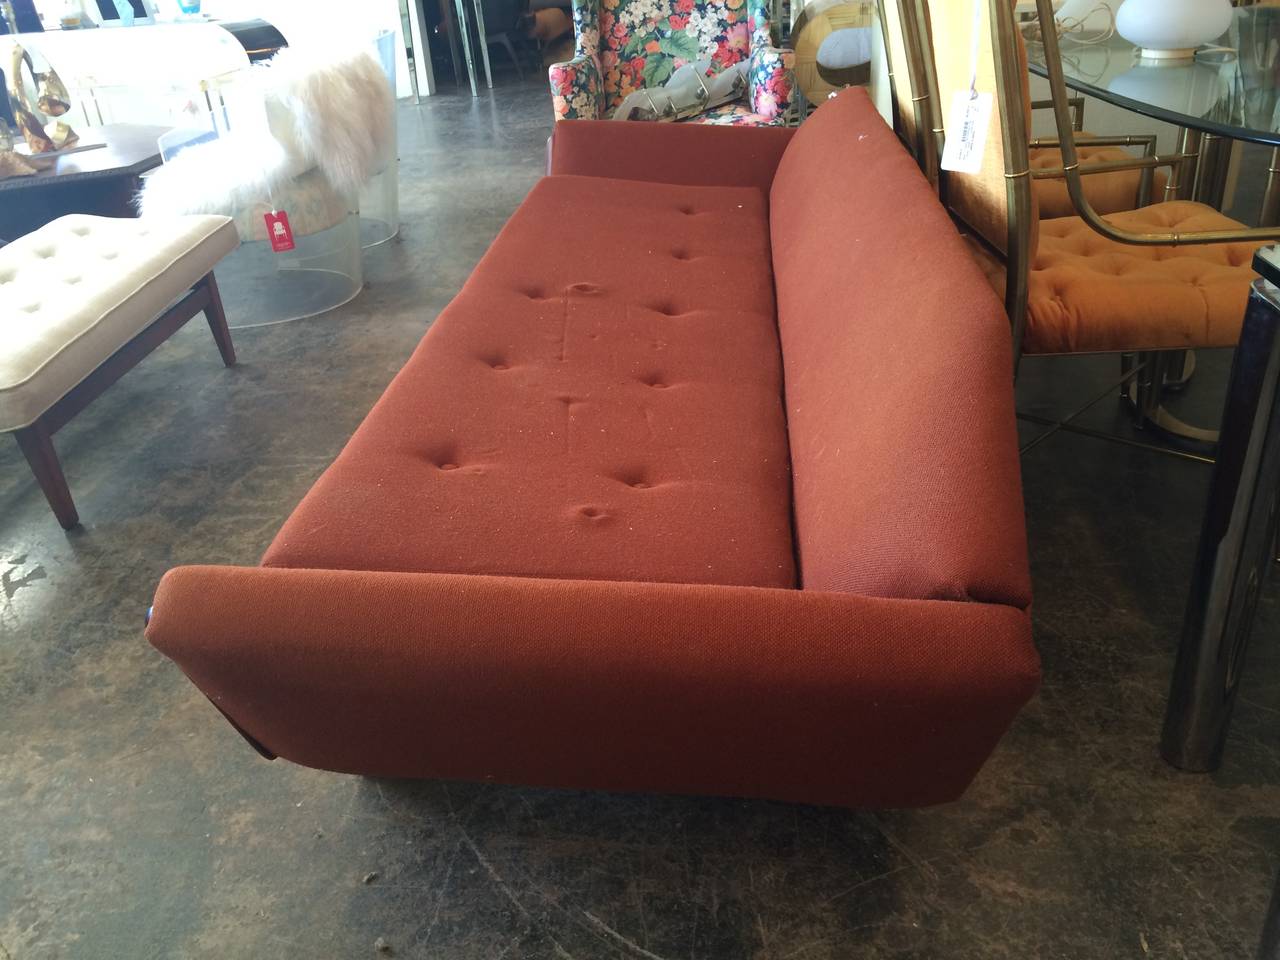 Gondola Sofa by Adrian Pearsall for Craft Associates with American Walnut frame, with original upholstery. There is some nicks in the wood frame and recommend new upholstery.

dimensions: 103